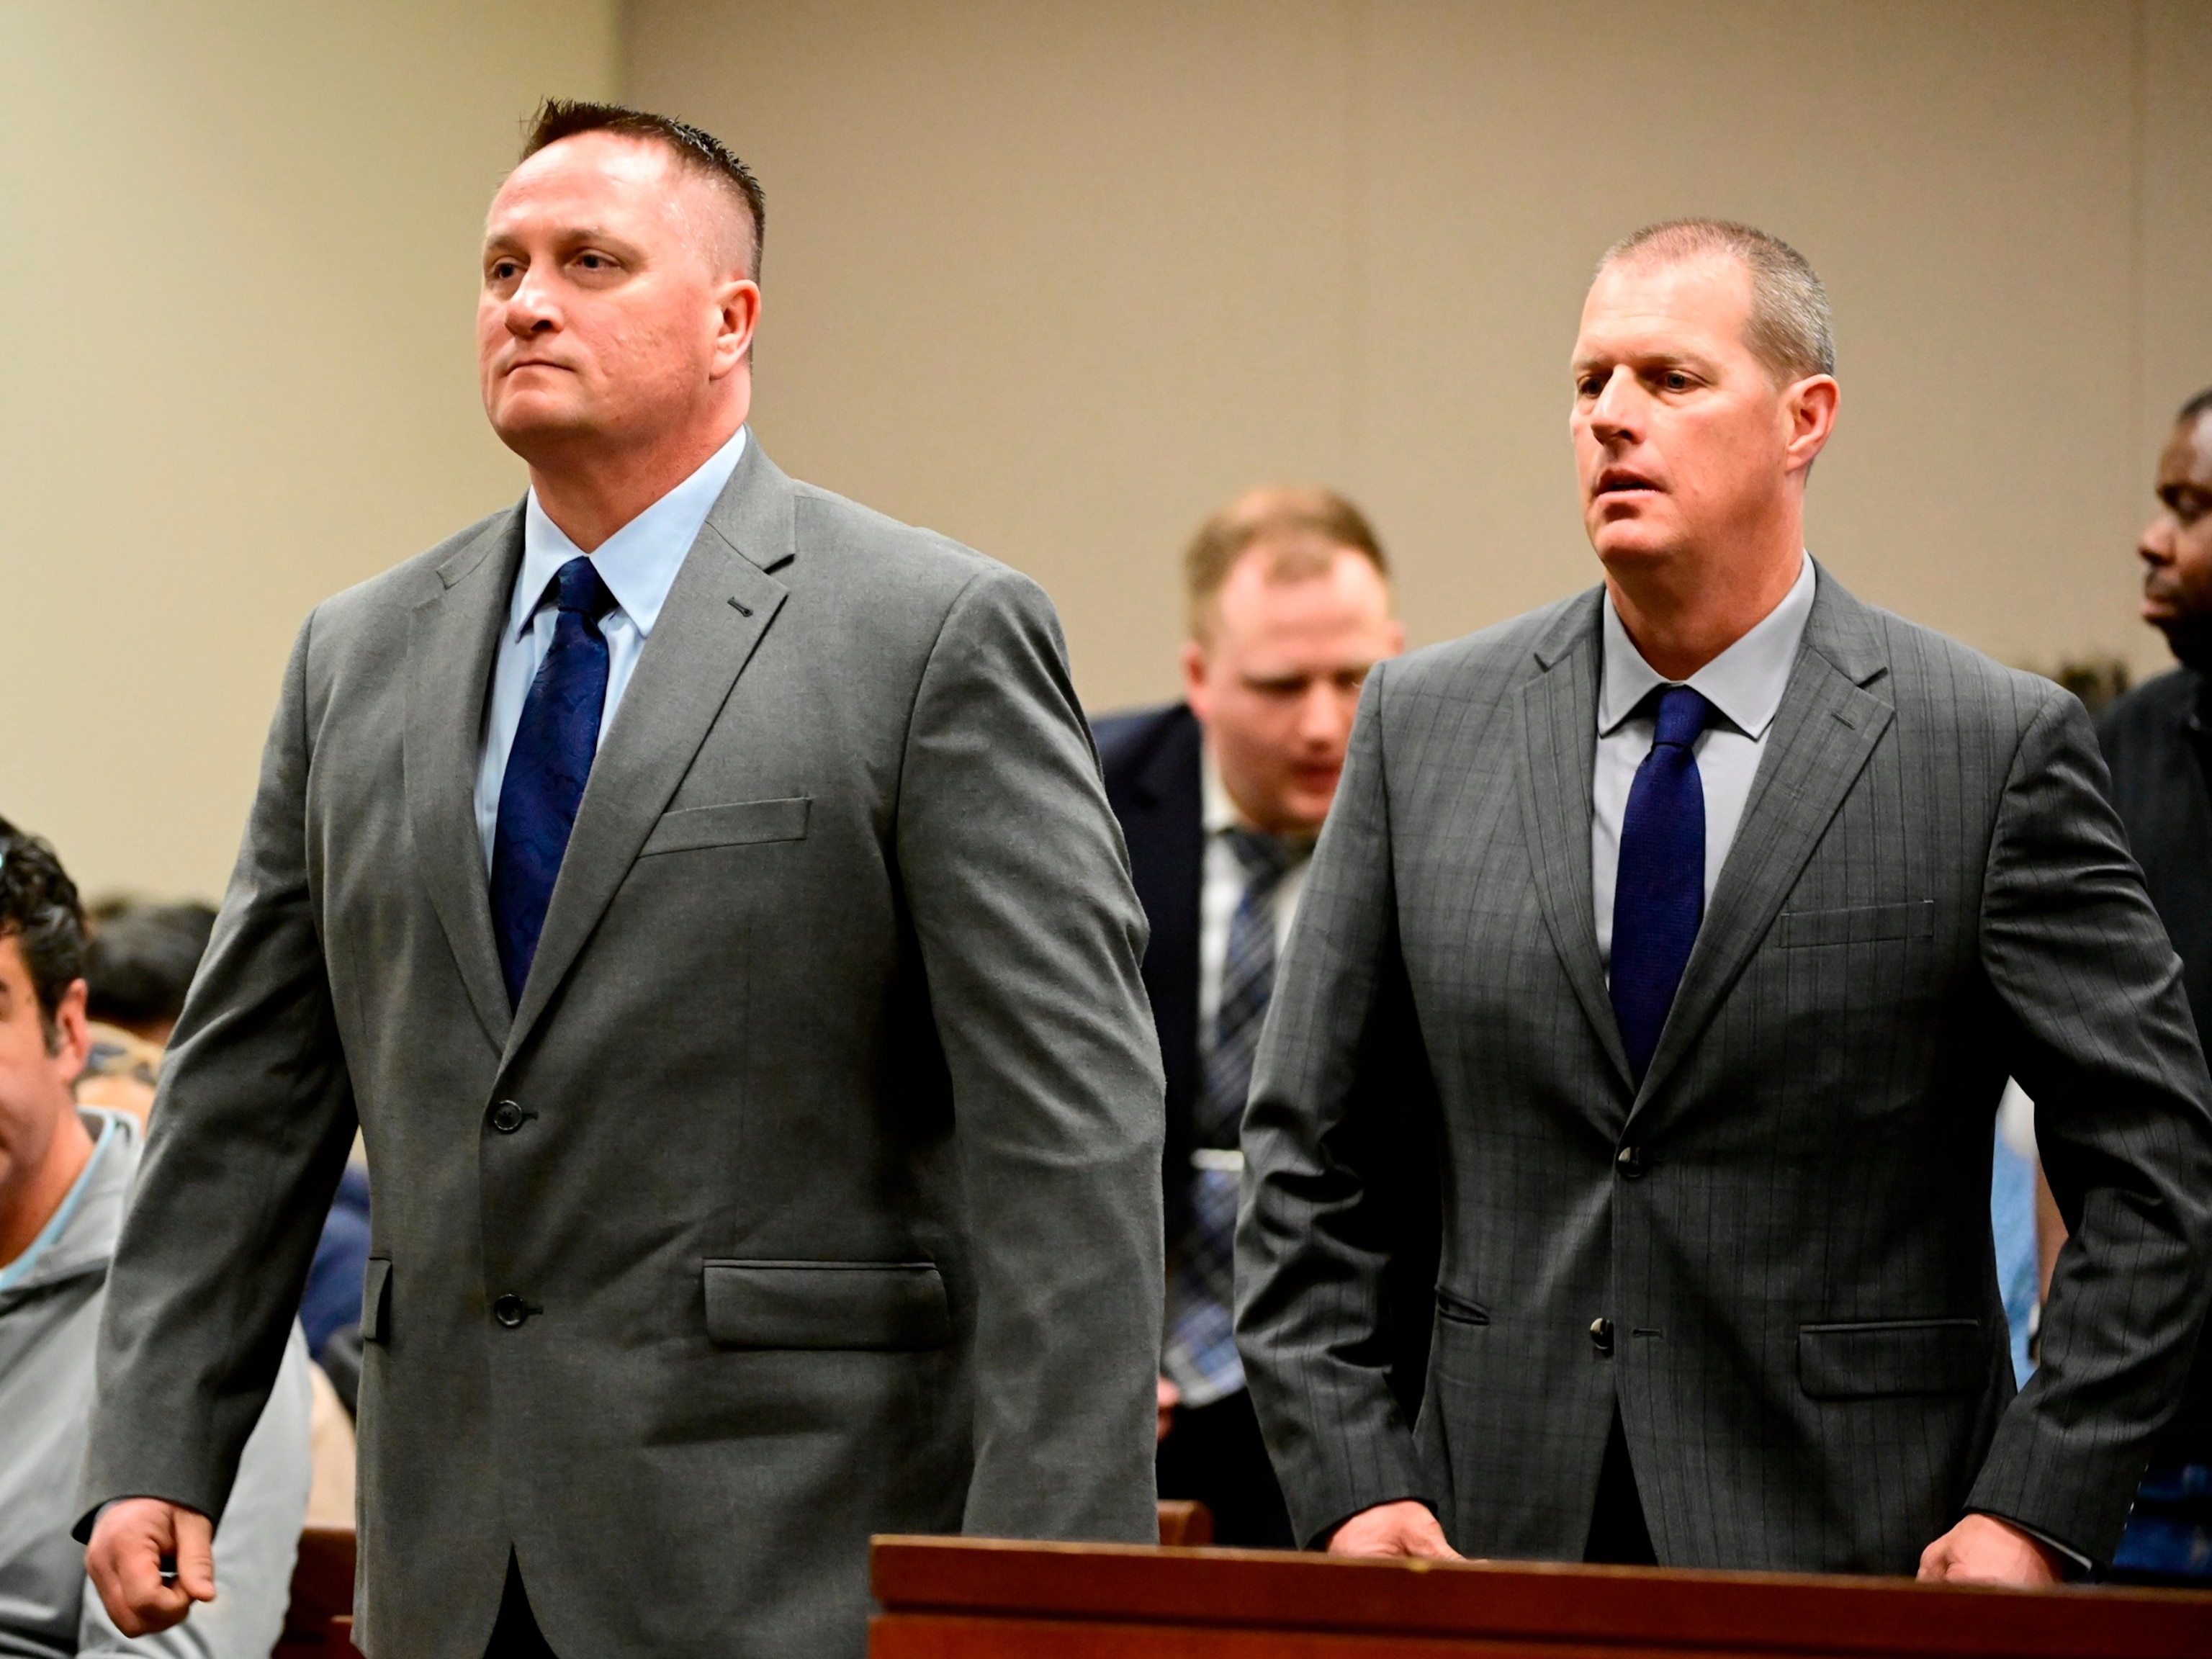 PHOTO: Paramedics Jeremy Cooper, left, and Peter Cichuniec, right, at an arraignment in the Adams County district court at the Adams County Justice Center Jan. 20, 2023. 